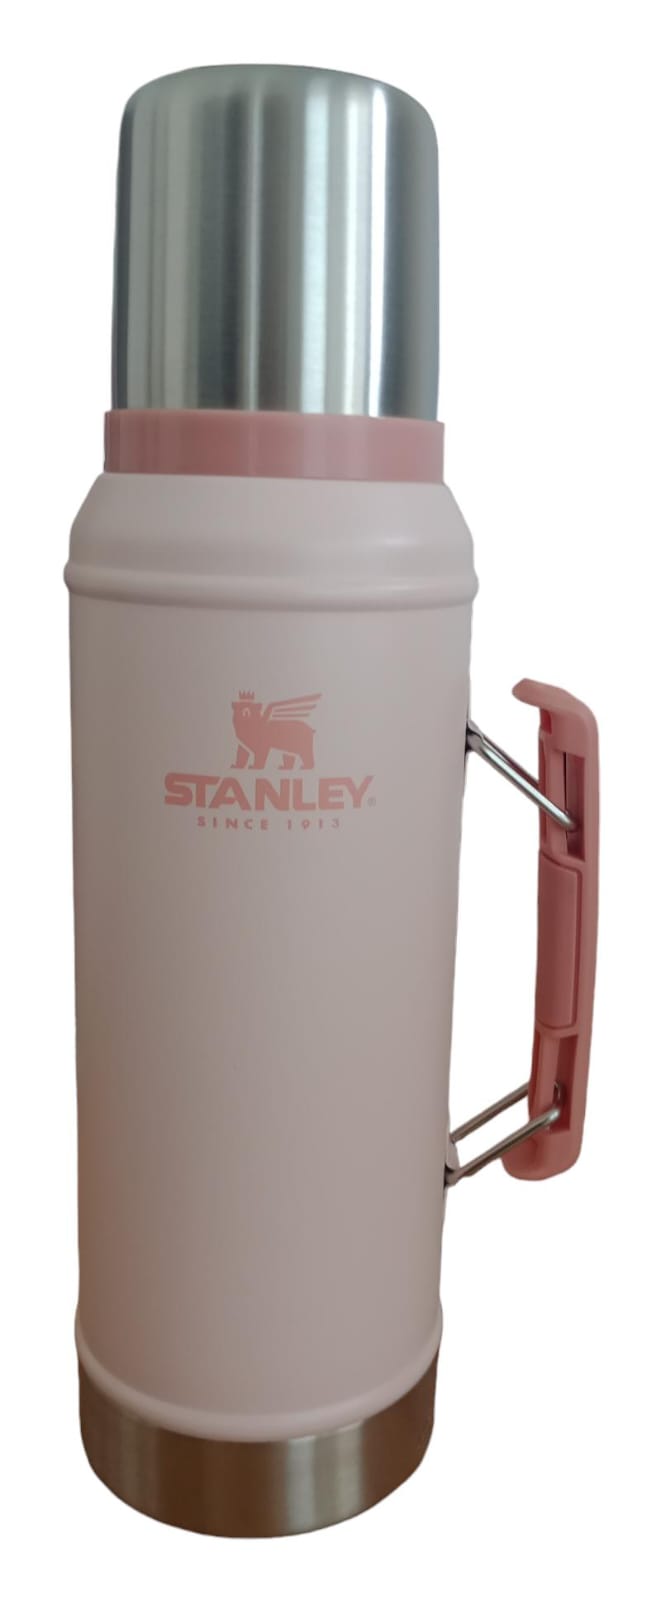 Termo Stanley / Flask Stanley & Stanley products